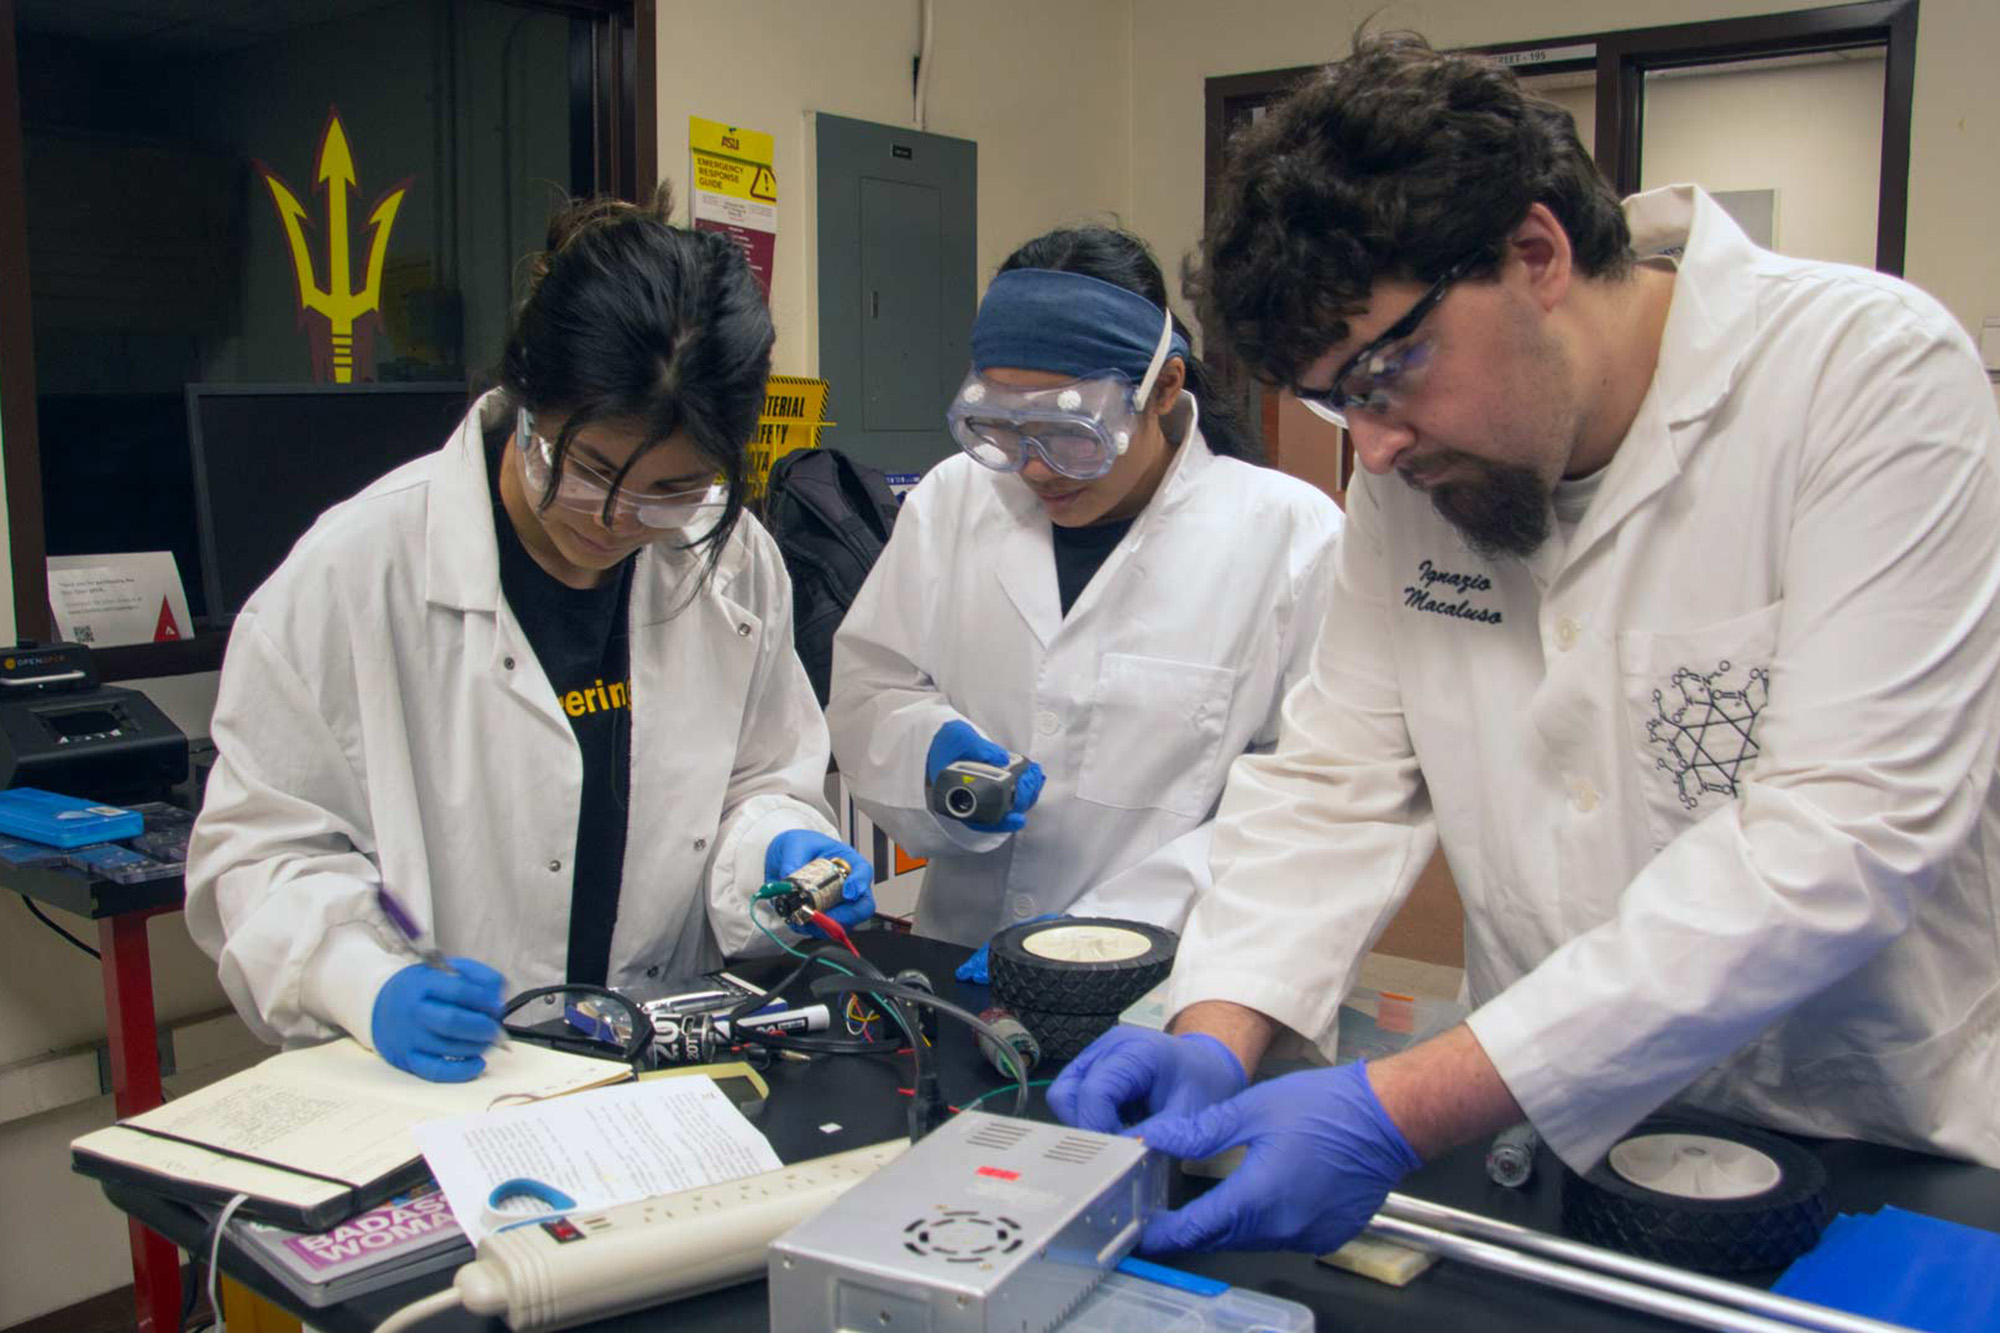 Three students in lab safety gear work at a bench on an electronic object.